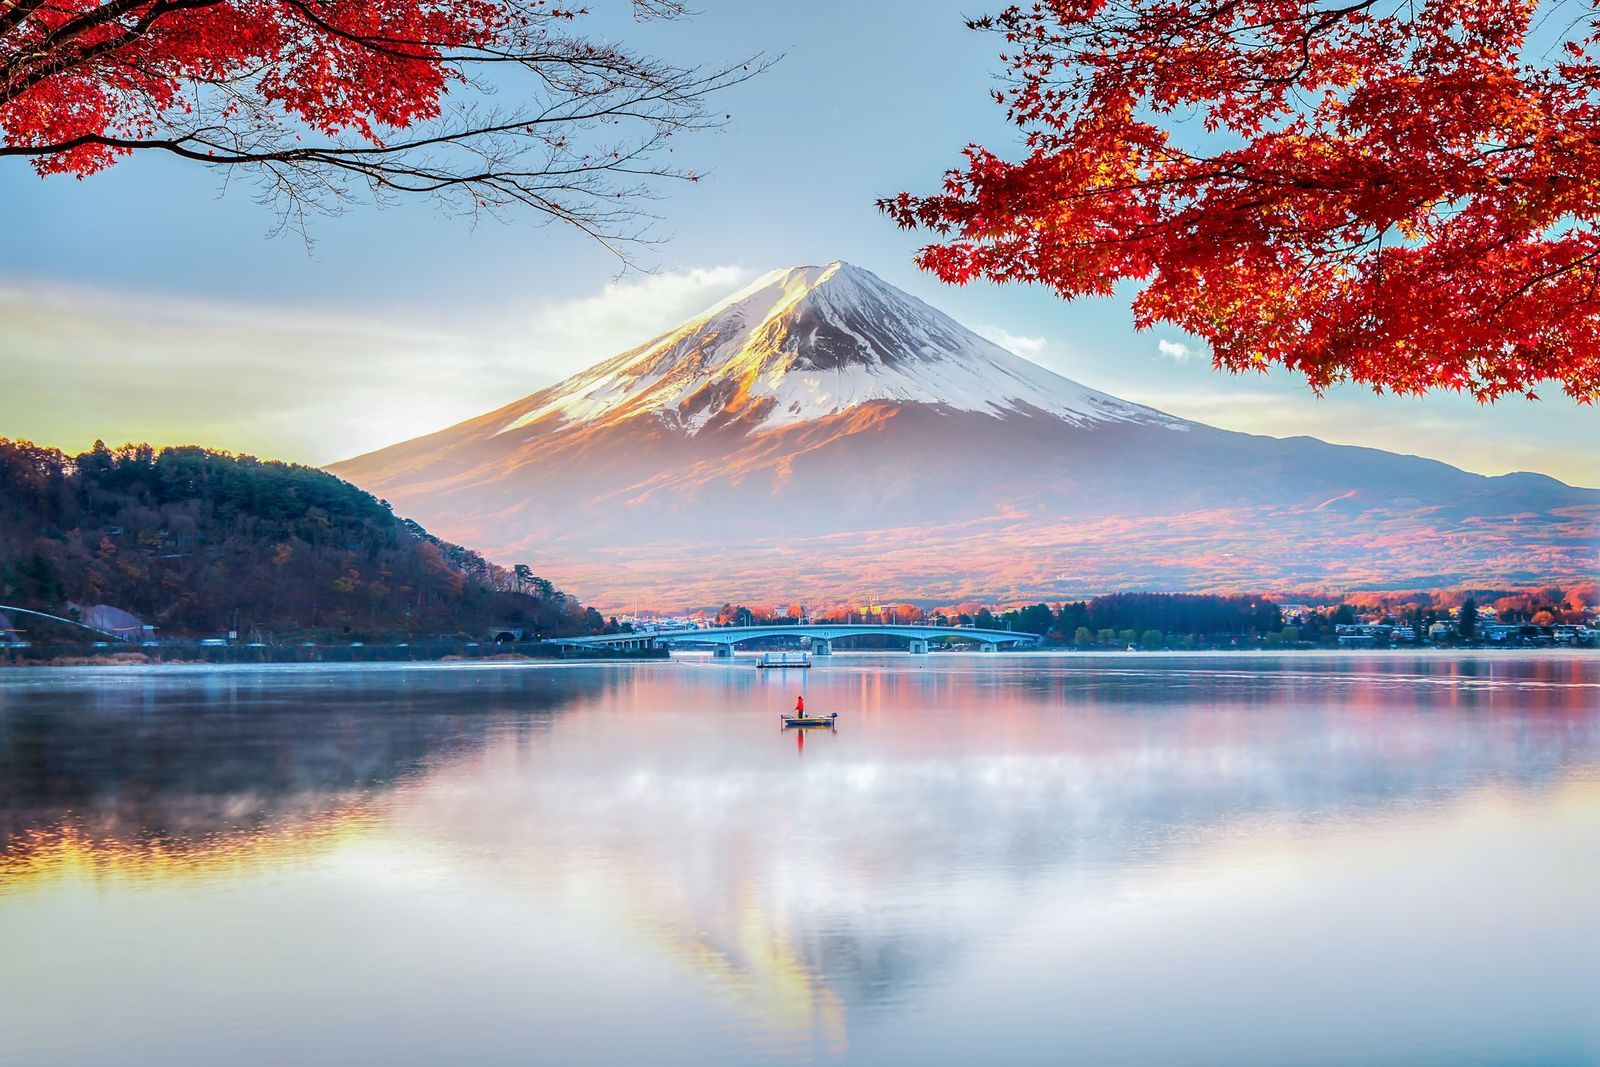 The snow-capped, symmetrical summit of Mount Fuji, Japan, at sunrise, with a lake in the foreground.